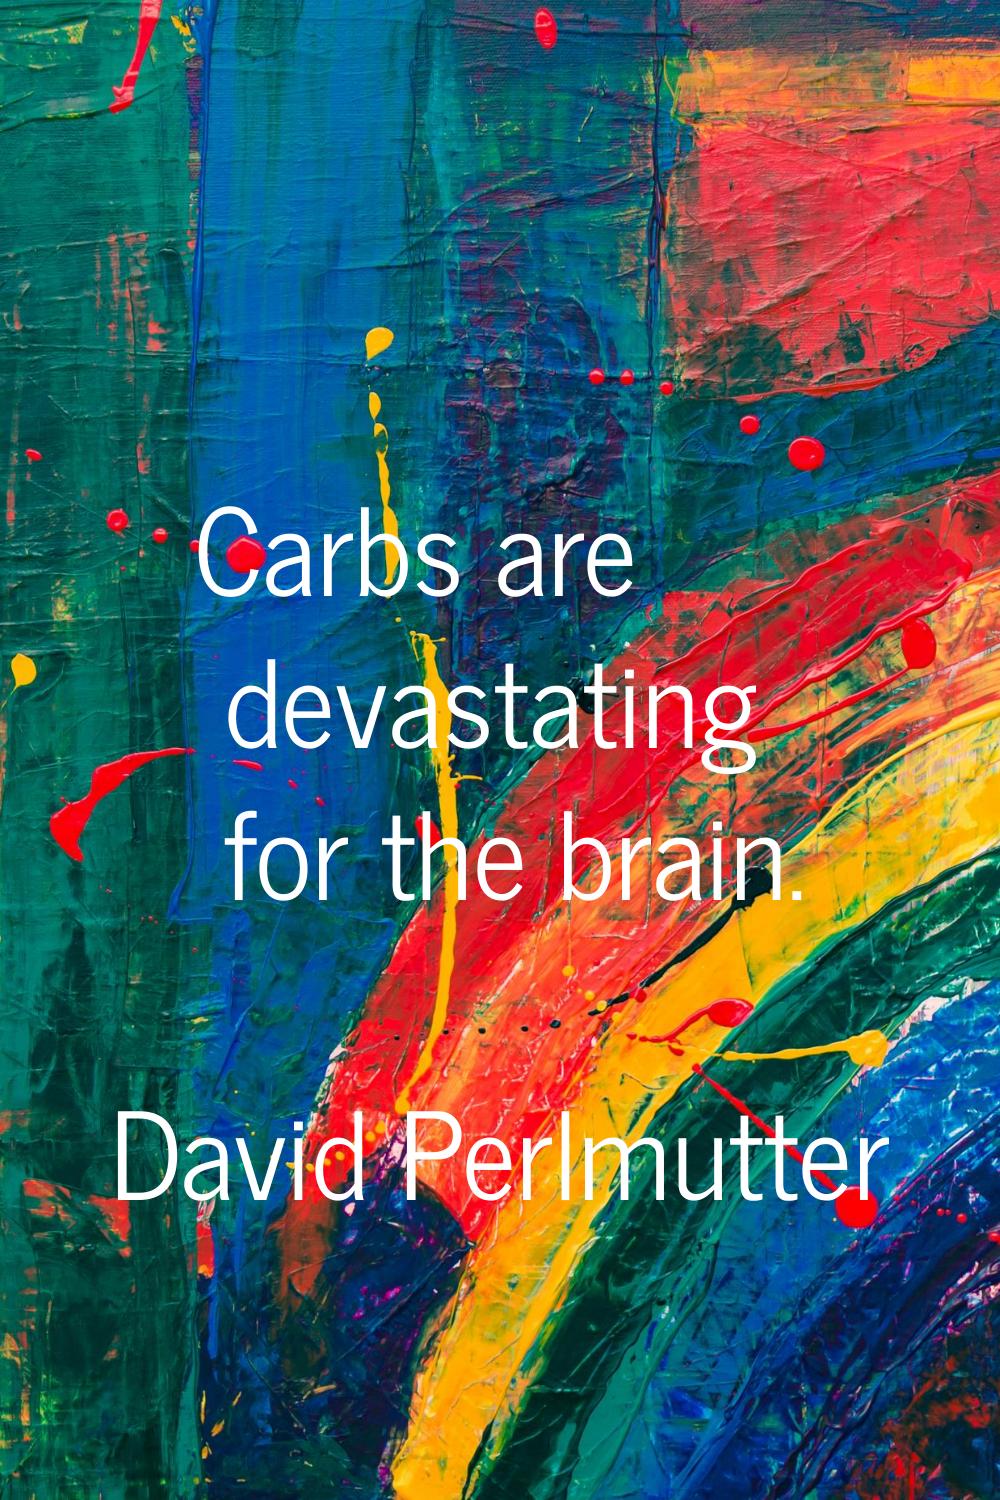 Carbs are devastating for the brain.